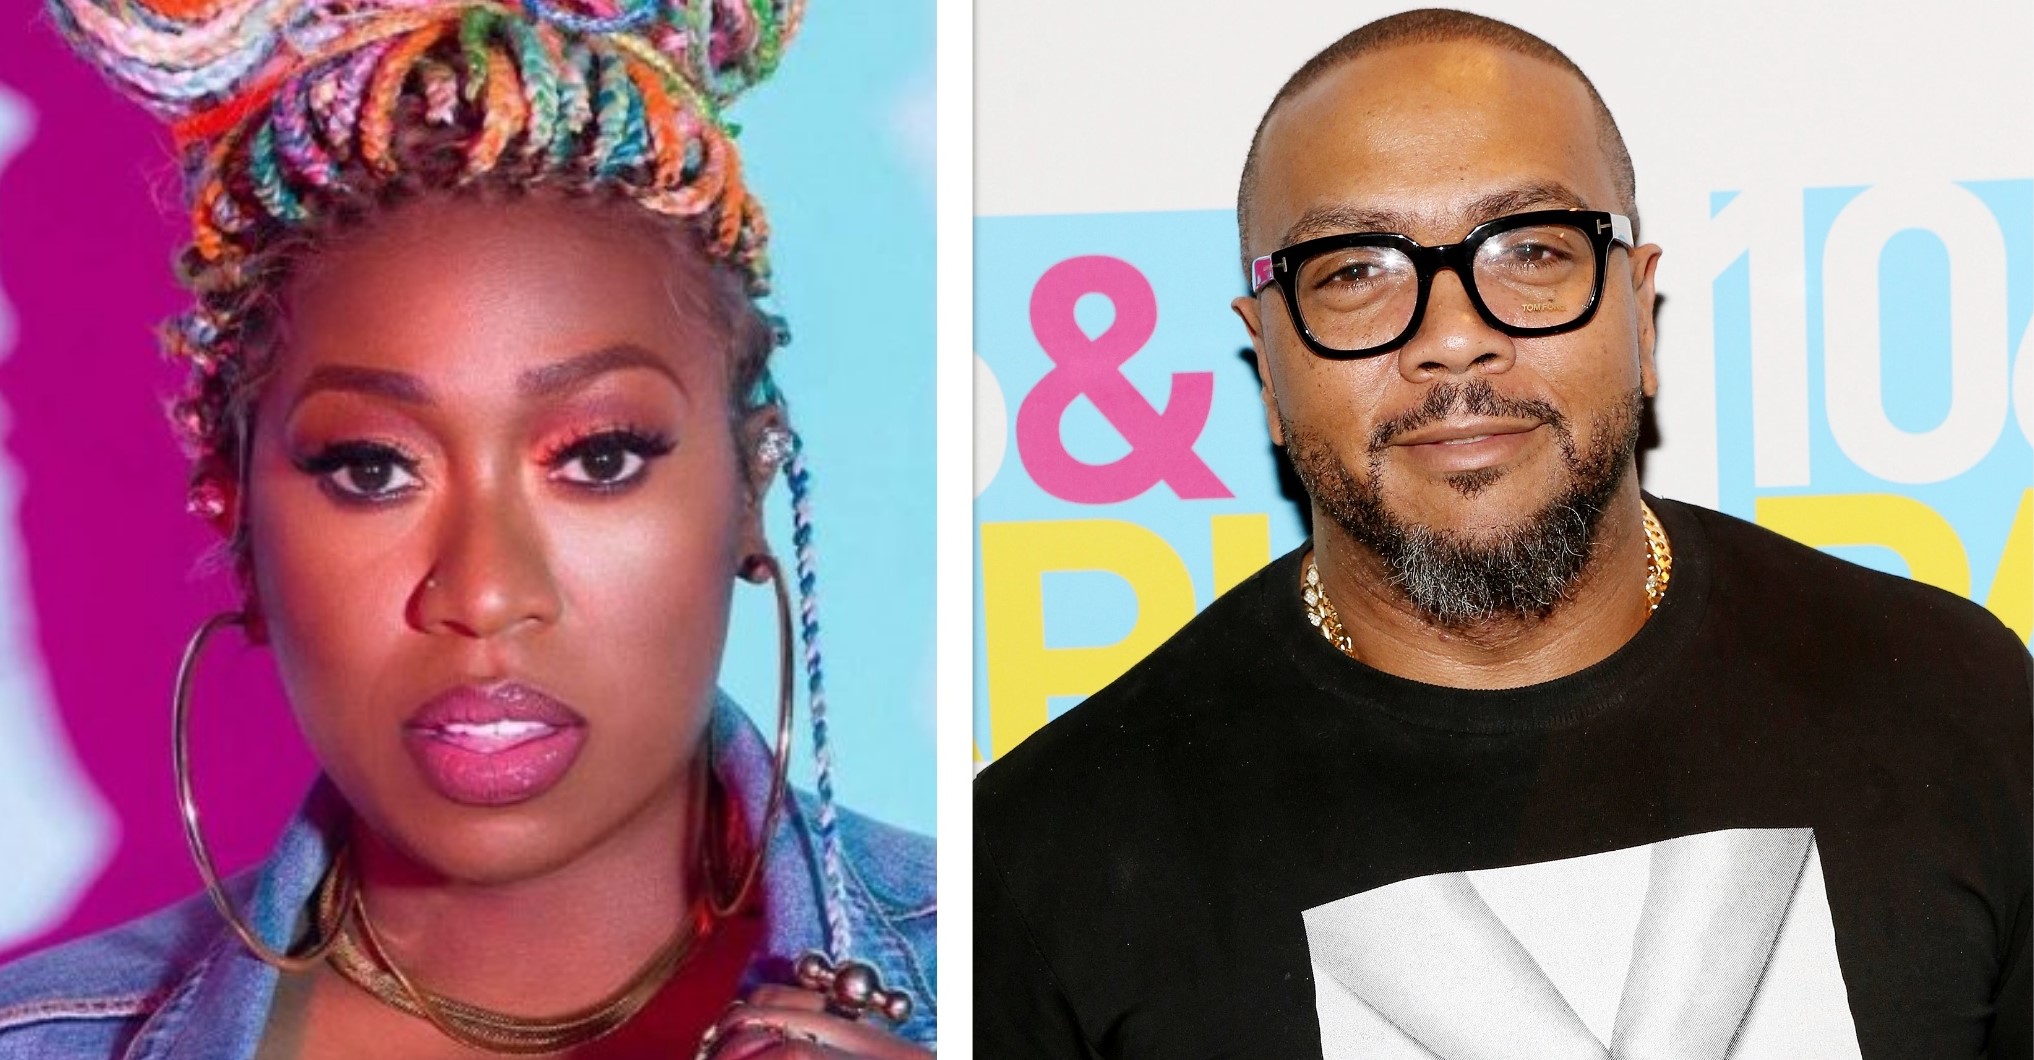 Missy Elliott & Timbaland tease new music after 20+ years